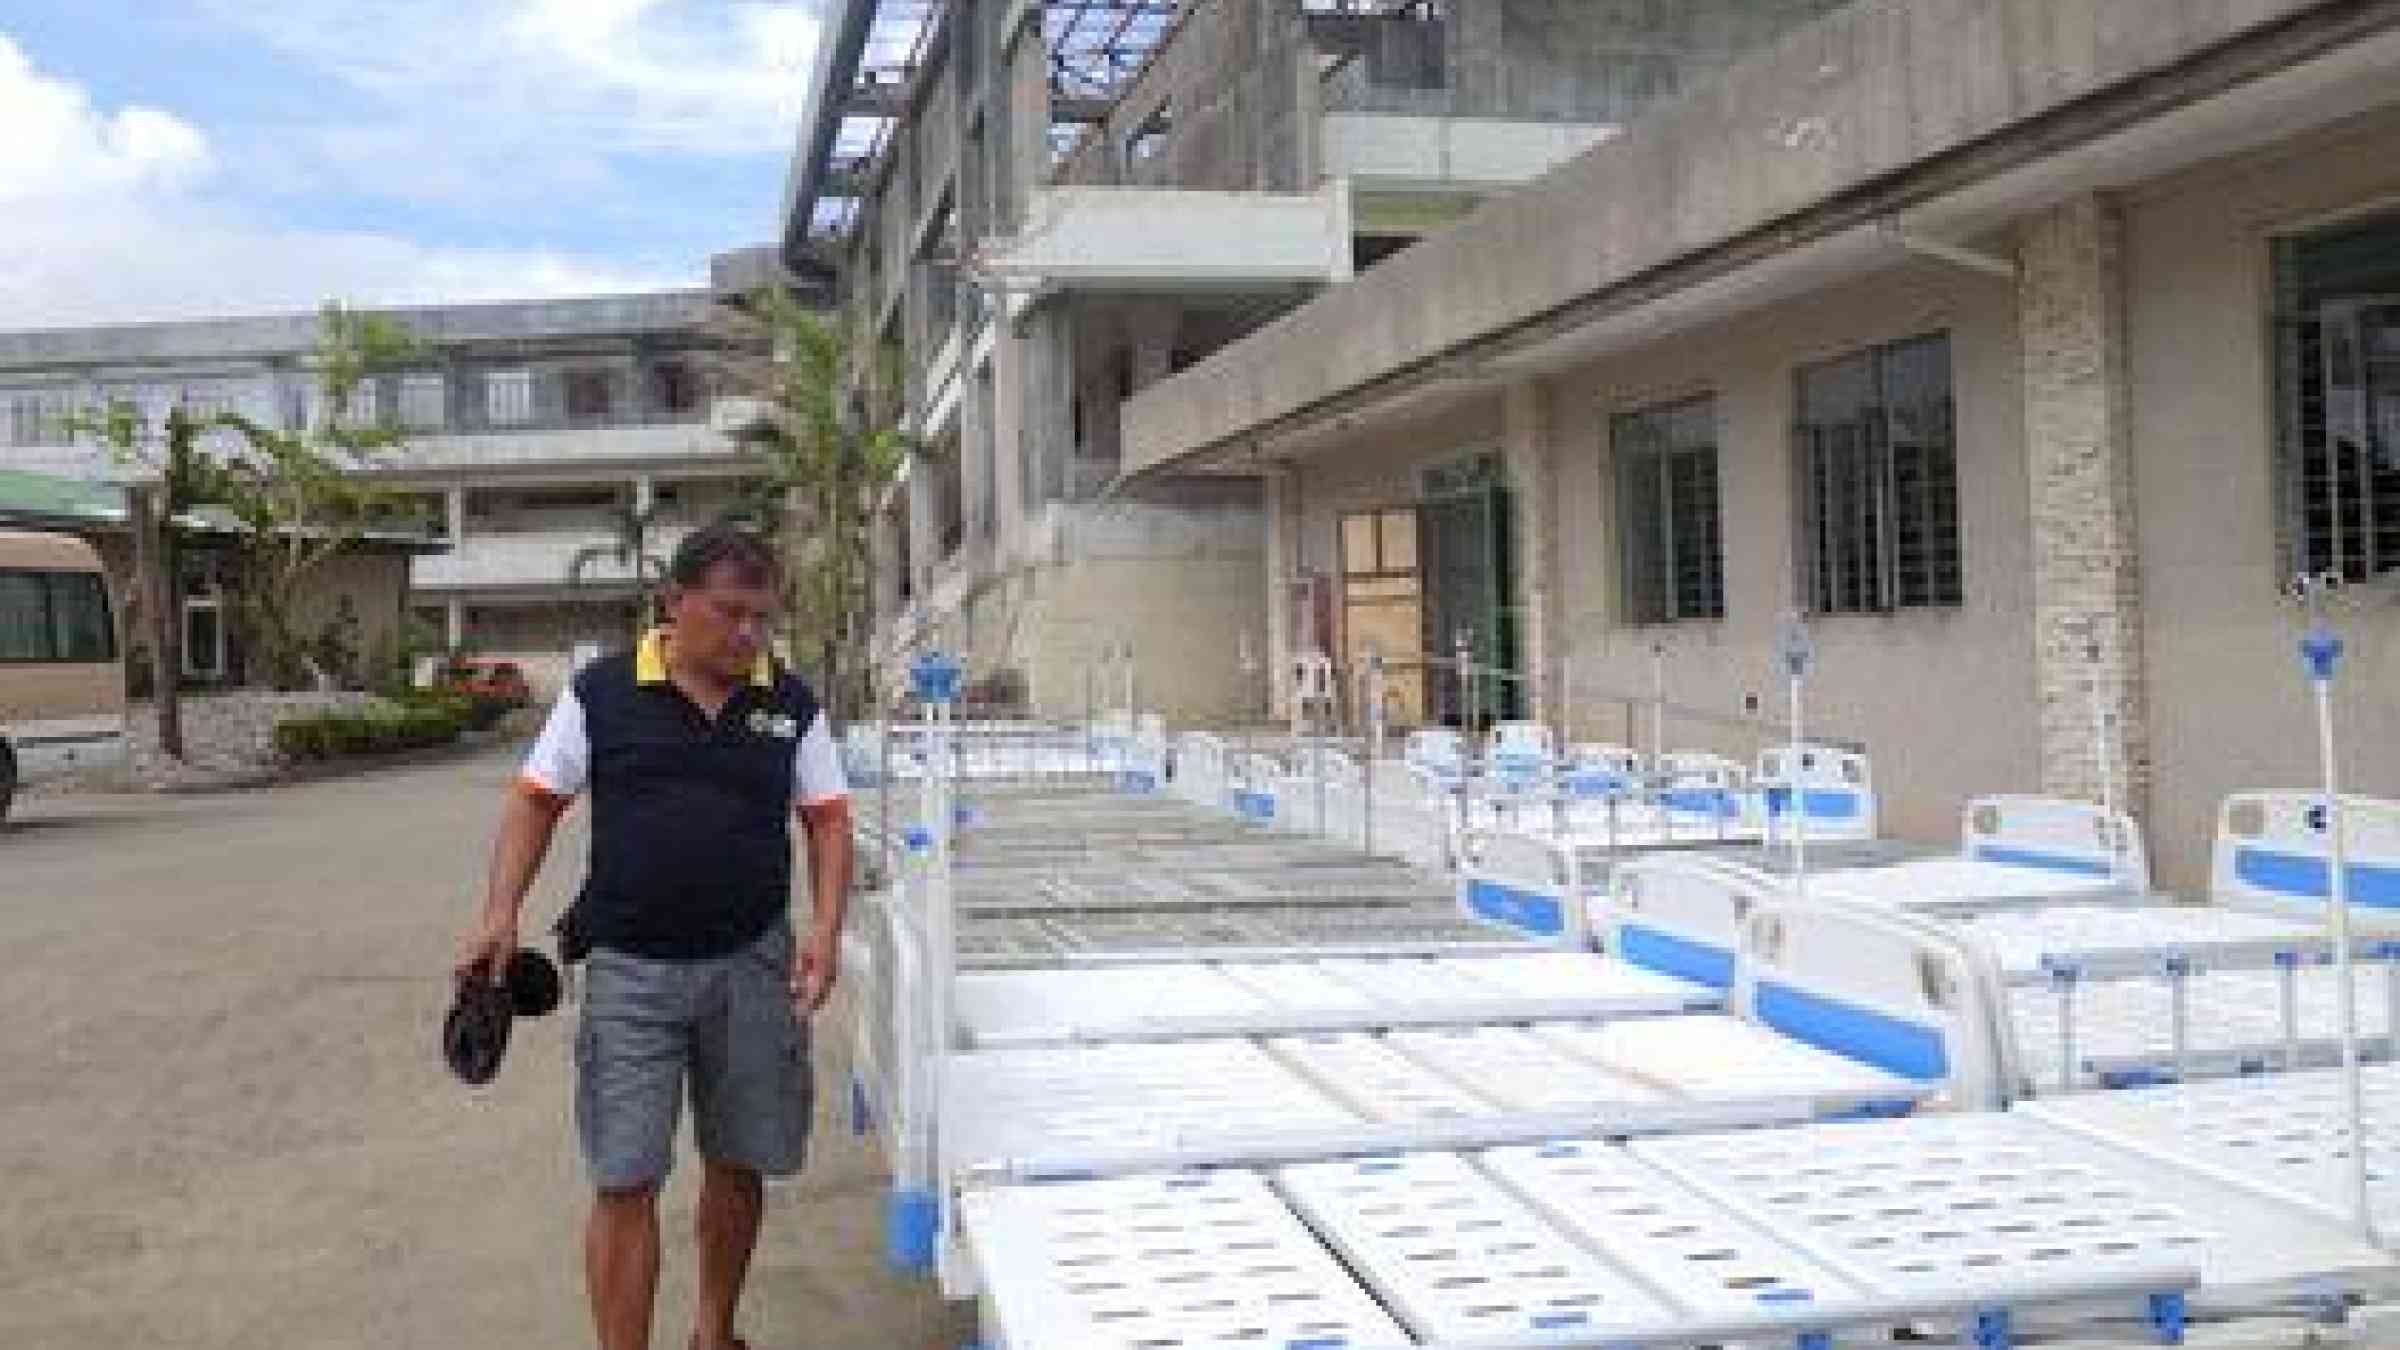 Dr. Cirilo Galindez inspects replacement beds for the flood-damaged hospital. Behind him looms the wreck of the concrete out-patients department which protected the main hospital from the worst of Typhoon Haiyan's fury.